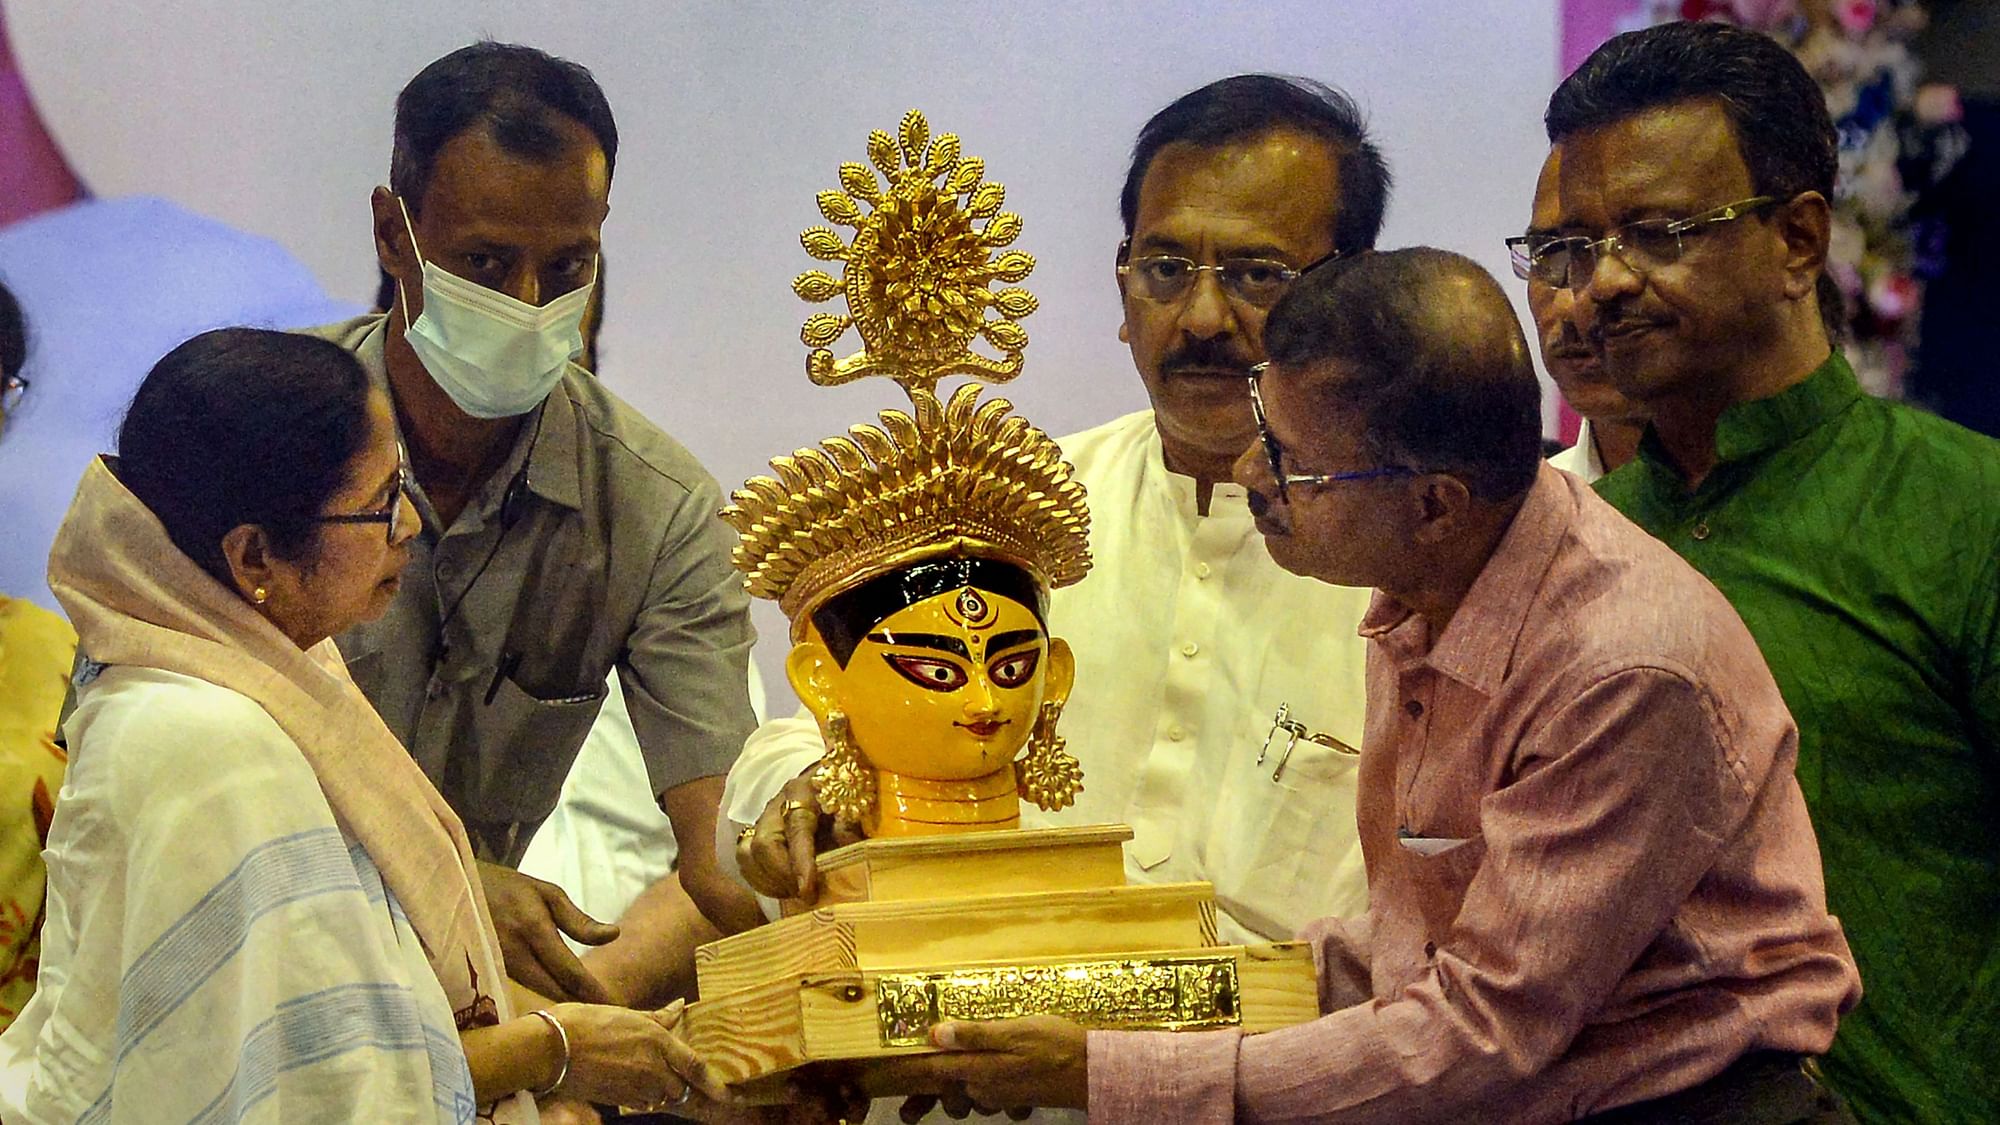 <div class="paragraphs"><p>West Bengal Chief Minister Mamata Banerjee being presented a bust of Goddess Durga during a coordination meeting with the organisers of Community Durga Puja, in Kolkata, on Monday, 22 August.</p></div>